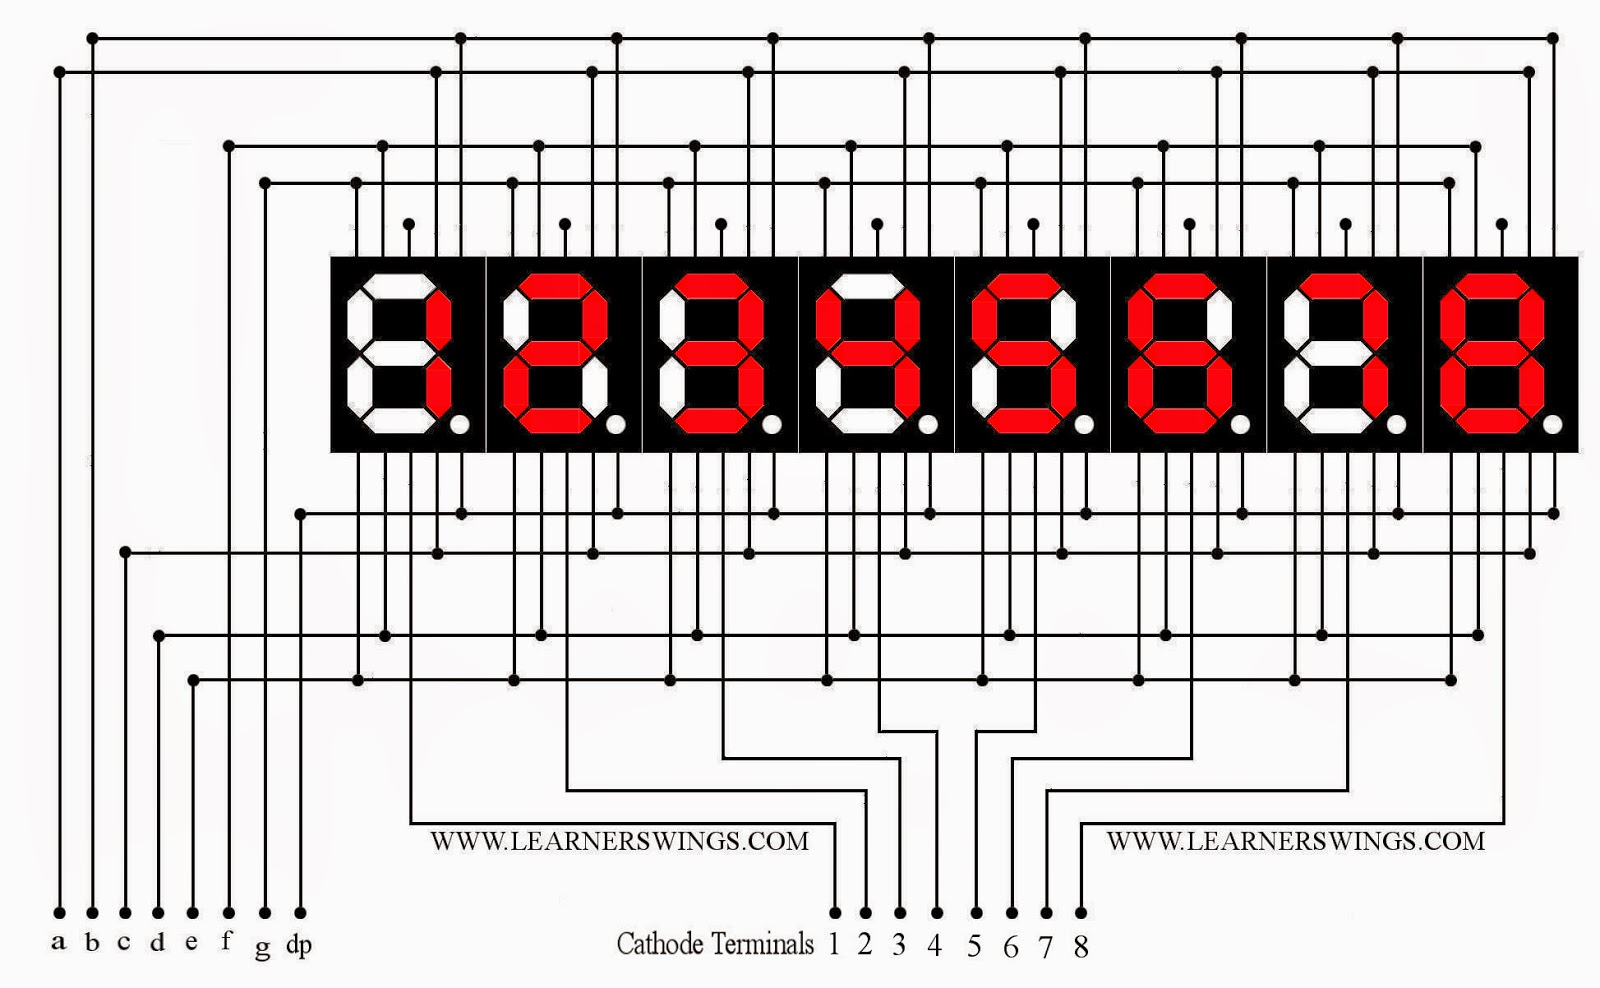 Circuit to Control a Cluster of 8 Seven Segment Displays using 16